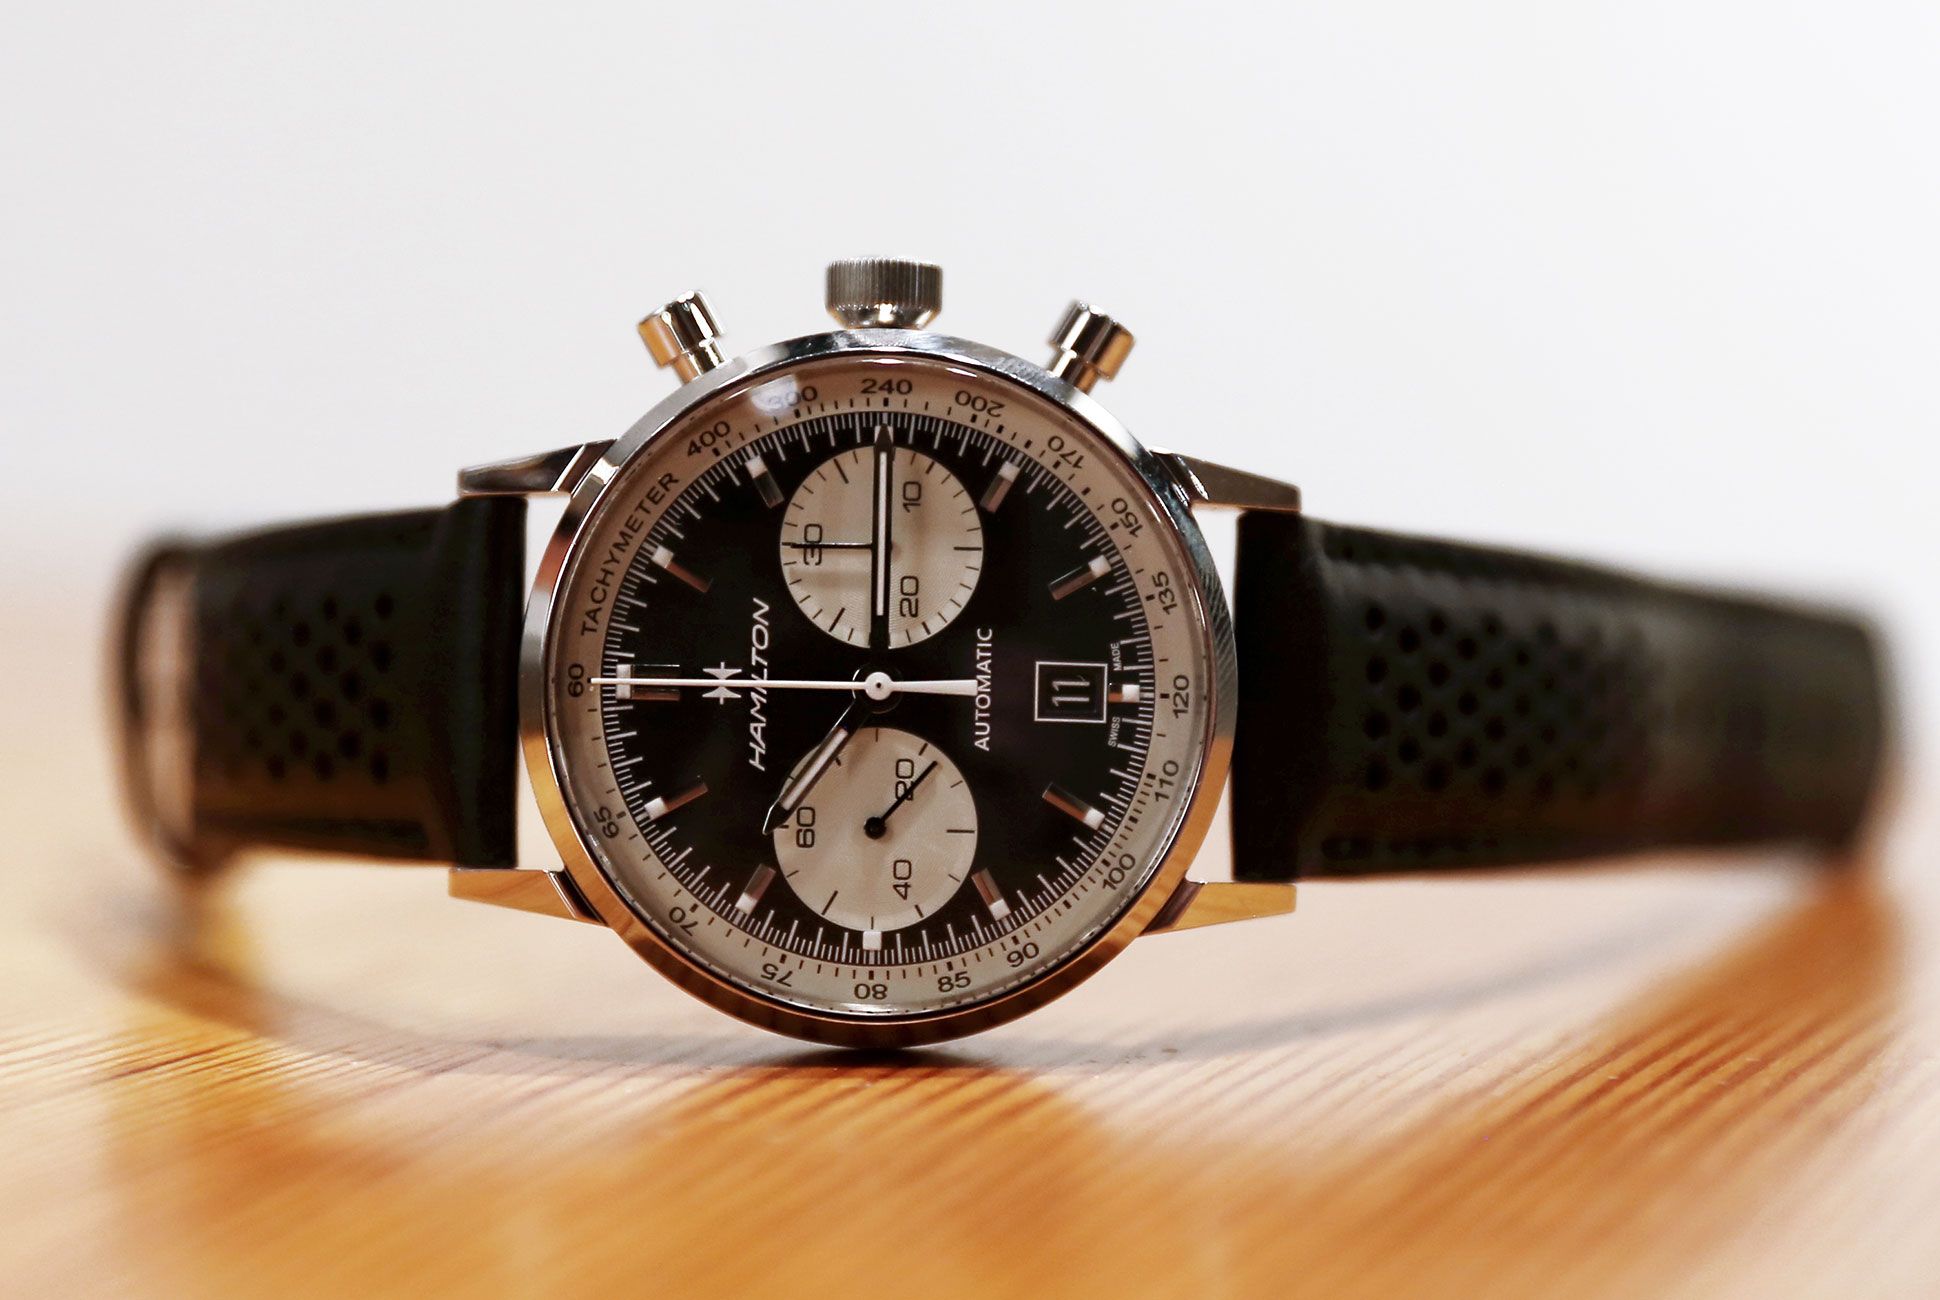 60s-Inspired Chronograph